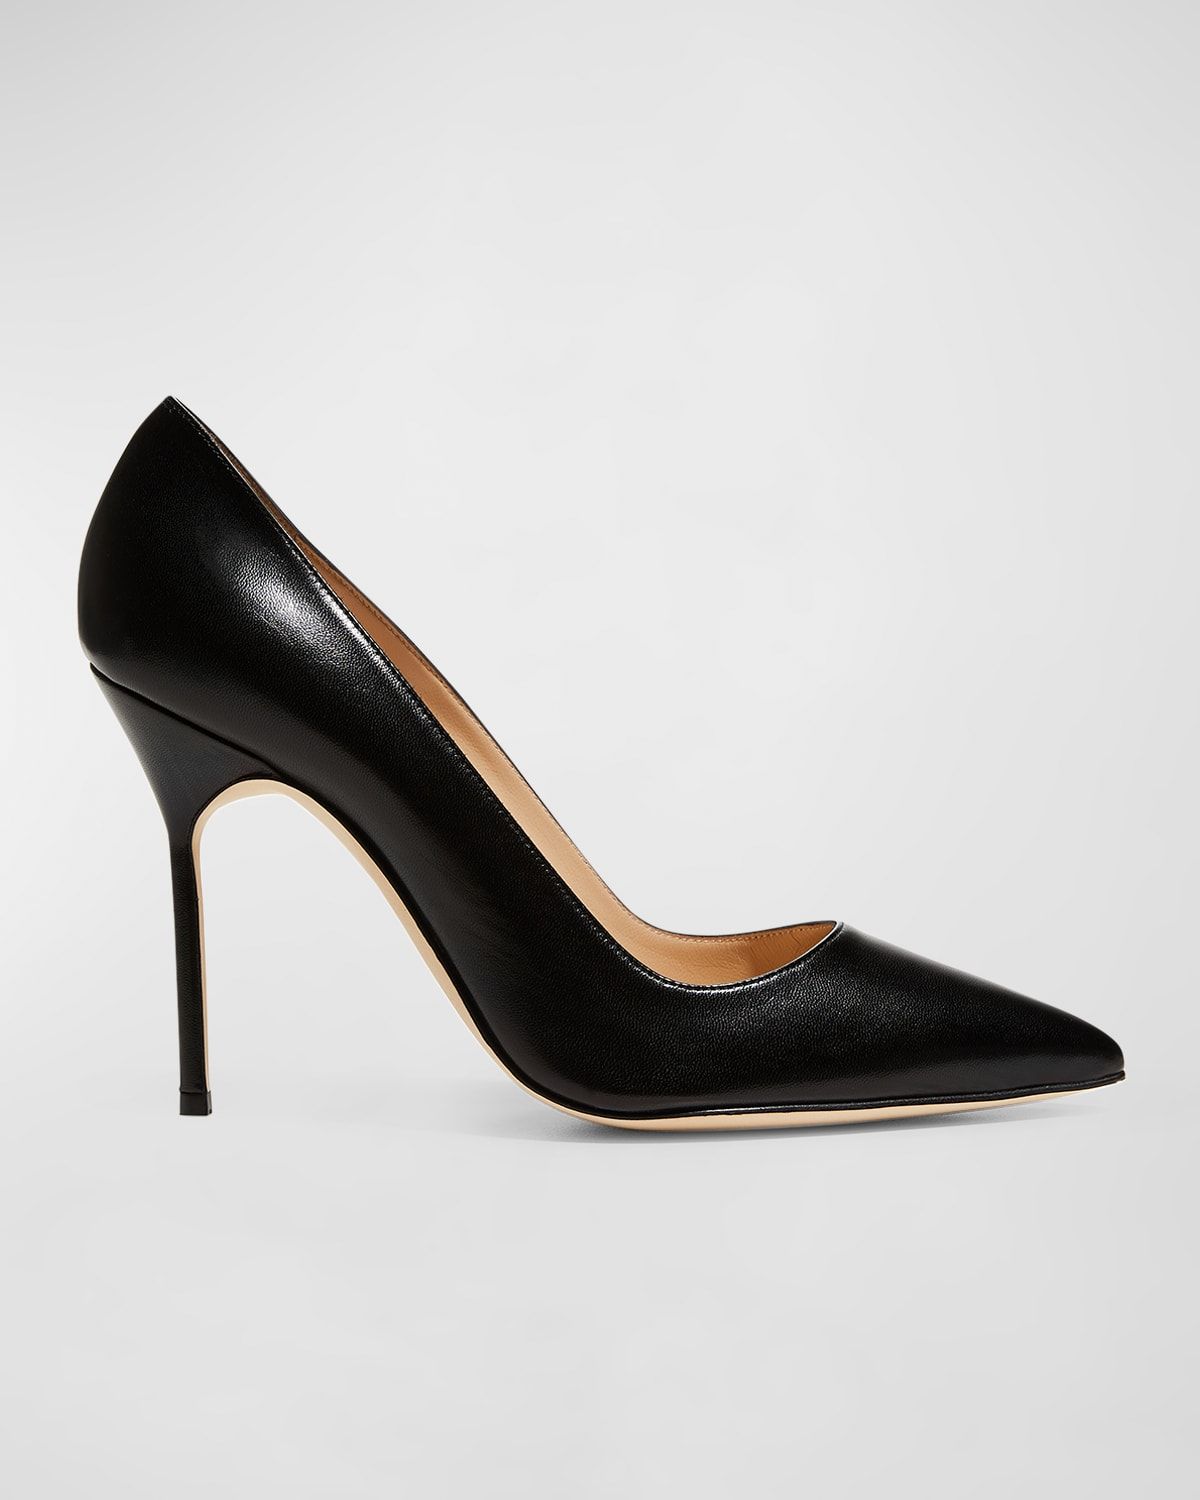 BB 105mm Leather Pumps | Neiman Marcus